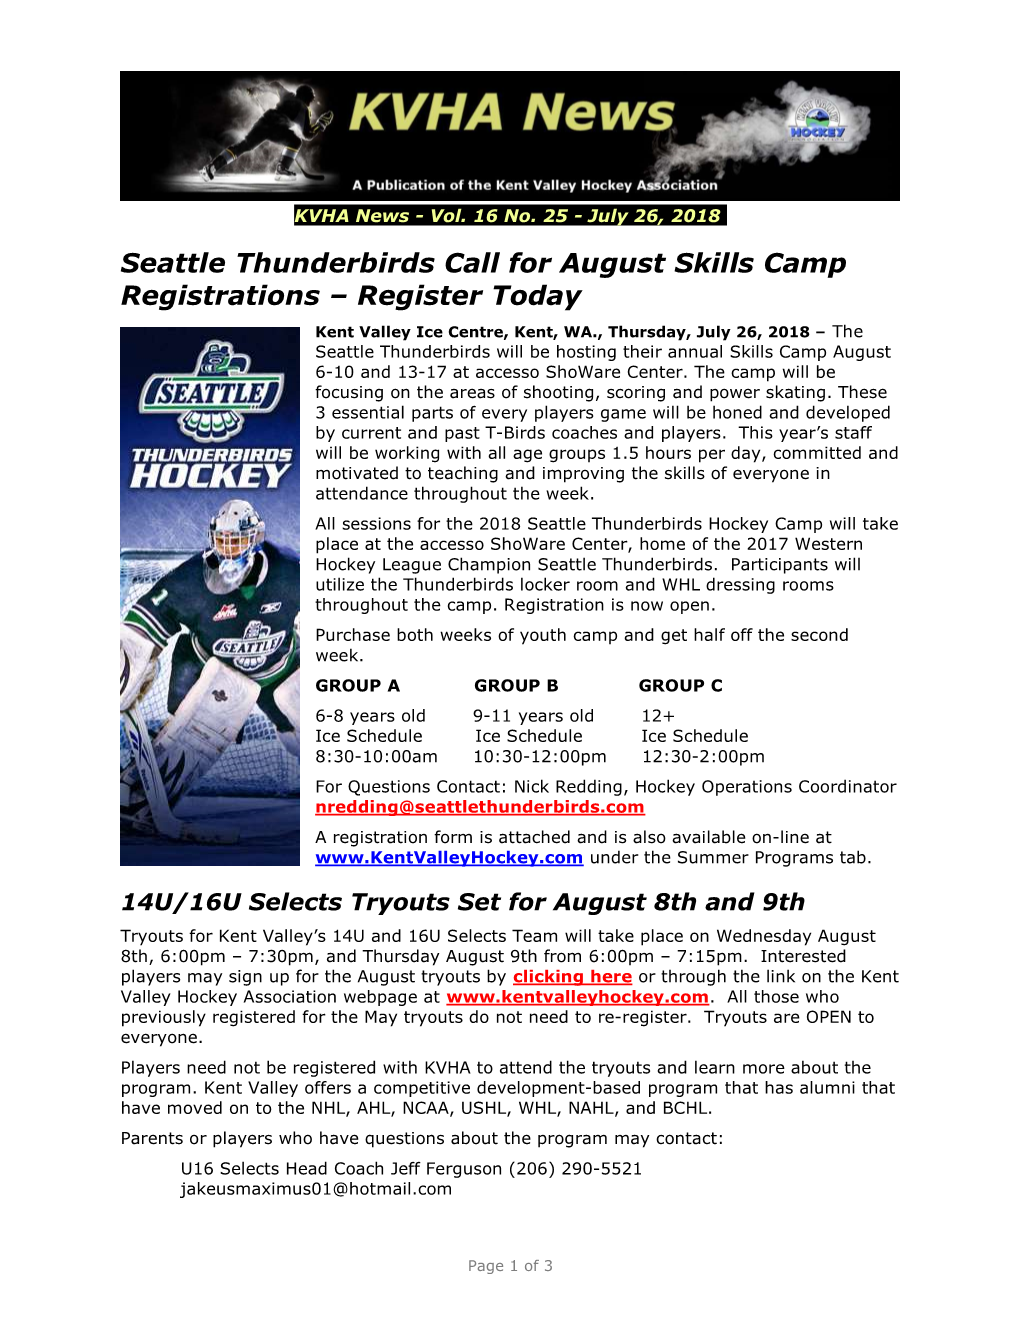 Seattle Thunderbirds Call for August Skills Camp Registrations